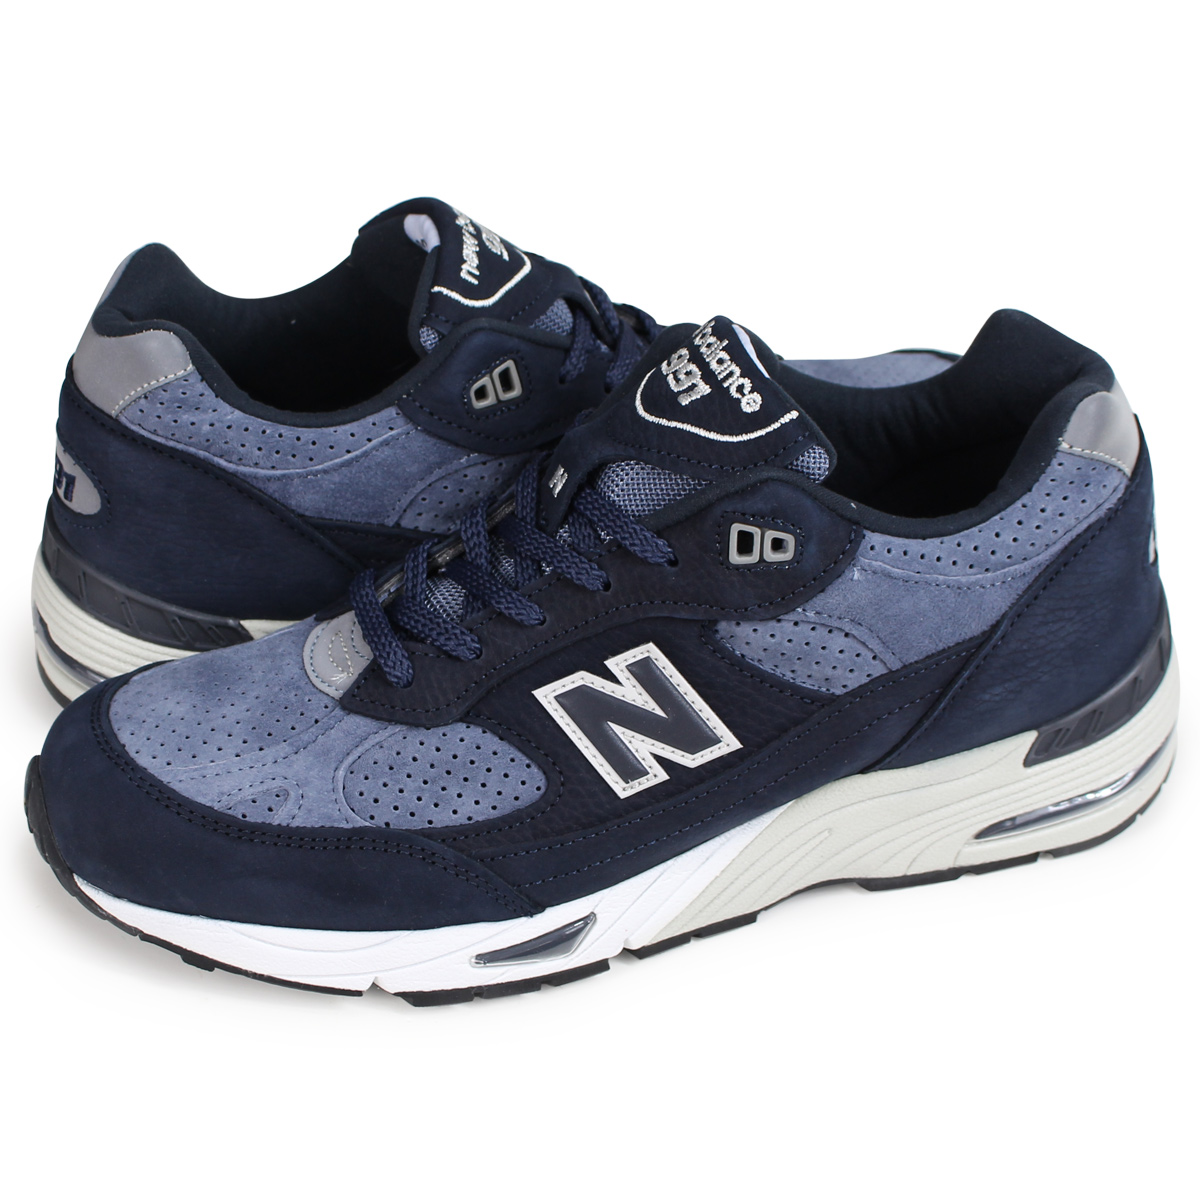 new balance outlet romania uk, OFF 72%,Special offer!